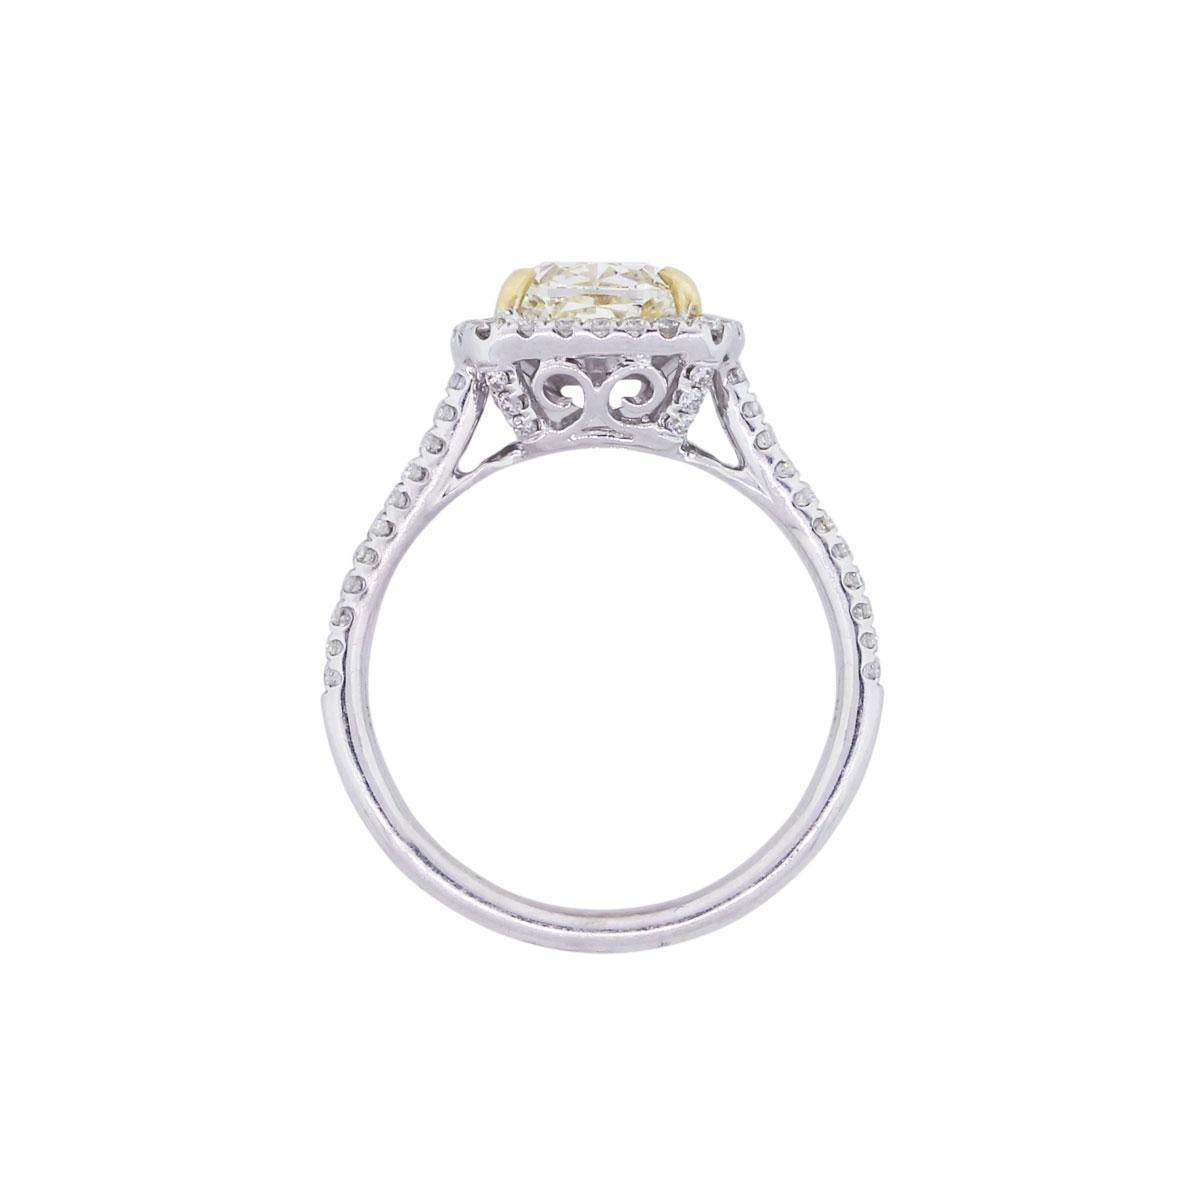 Material: 14k White Gold
Center Diamond Details: Cushion cut fancy yellow diamond approximately 1.65ct
Adjacent Diamond Details: Approximately 0.48ctw of round brilliant diamonds. Diamonds are G/H in color and SI in clarity
Ring Size: 6.50
Ring